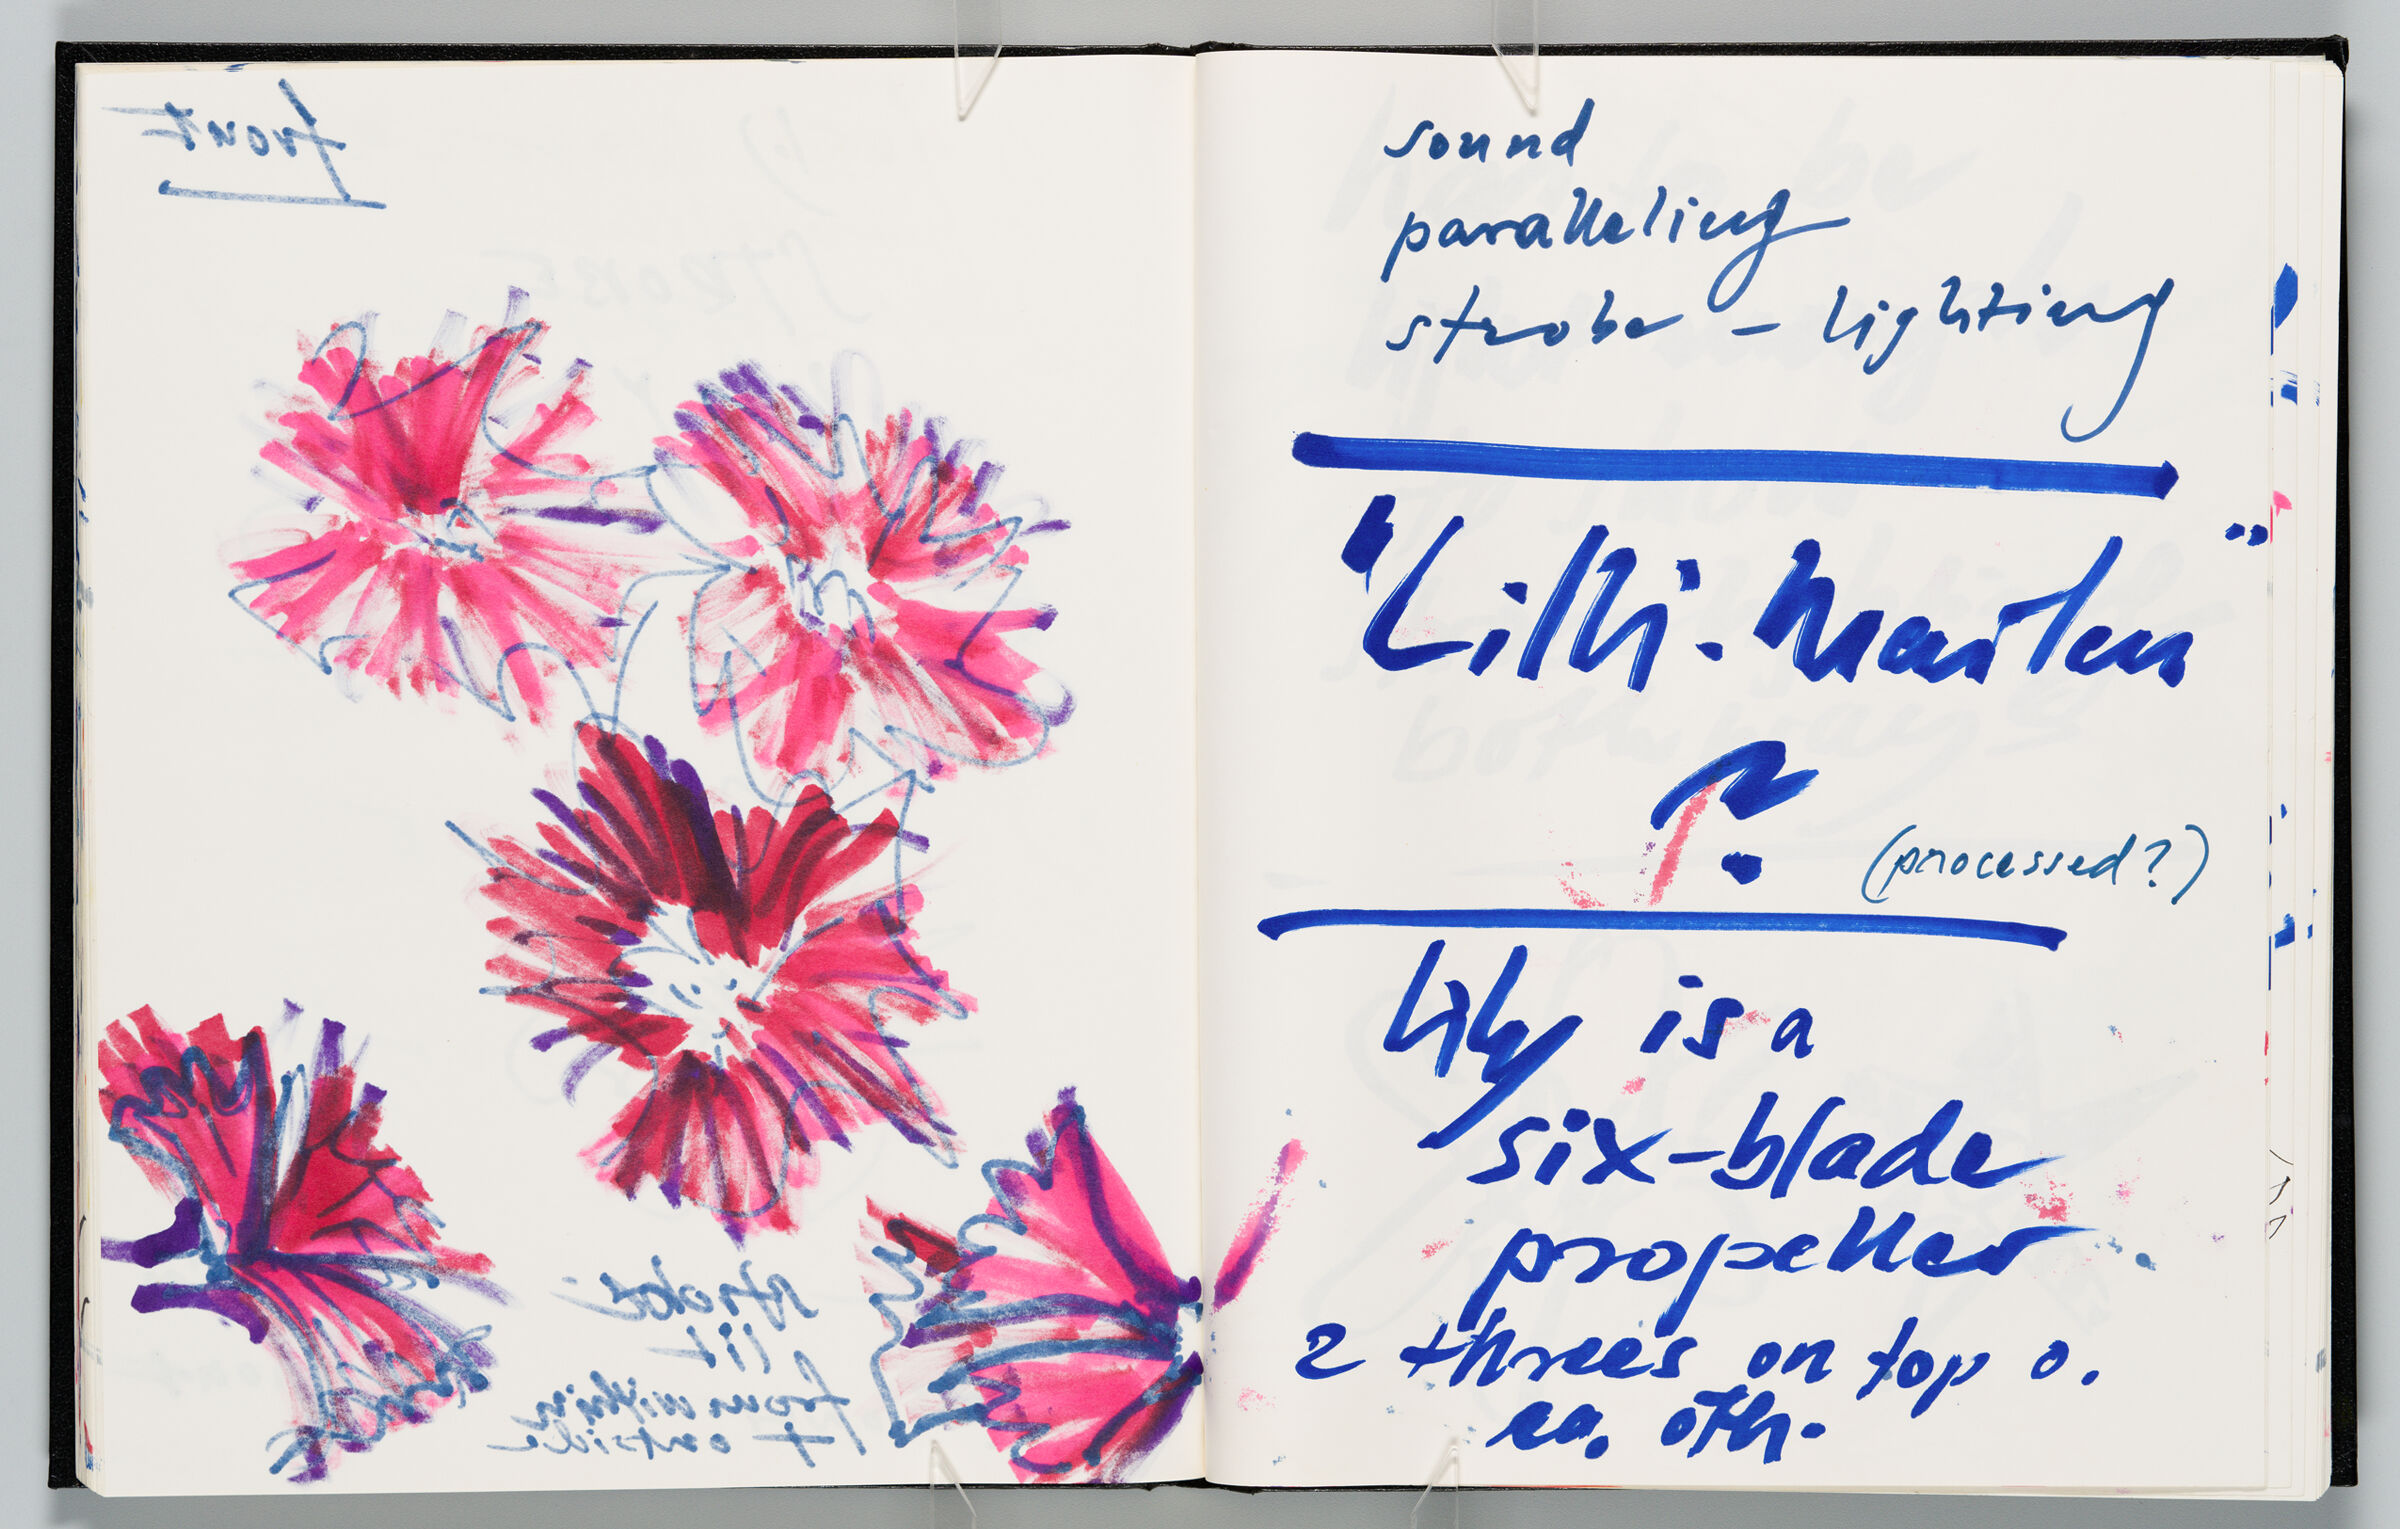 Untitled (Bleed-Through Of Previous Page, Left Page); Untitled (Notes With Color Transfer, Right Page)